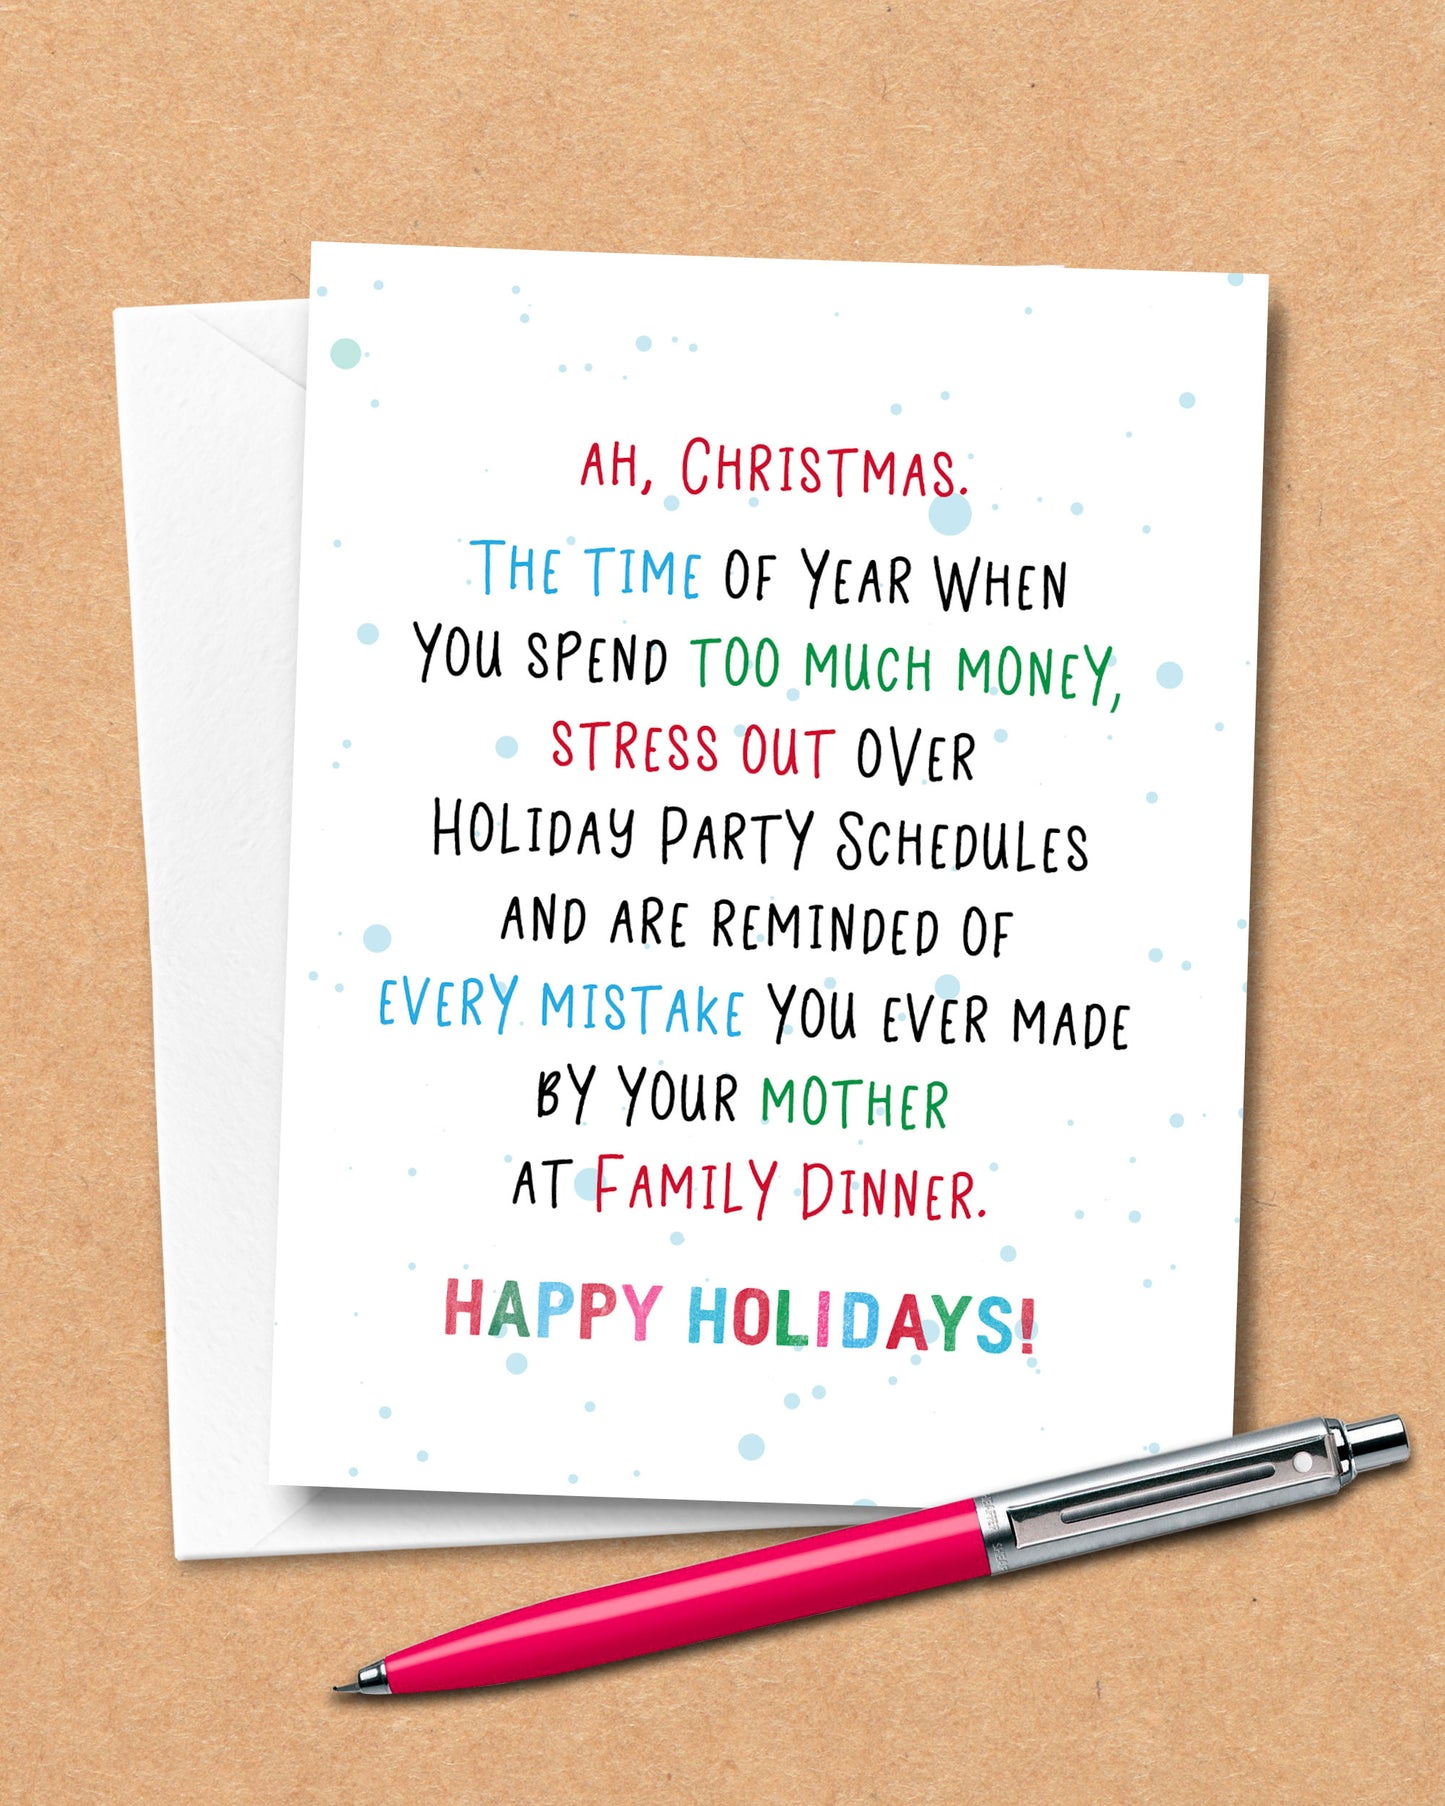 Humorous Christmas Cards, Funny Holiday Card by Smirkantile.